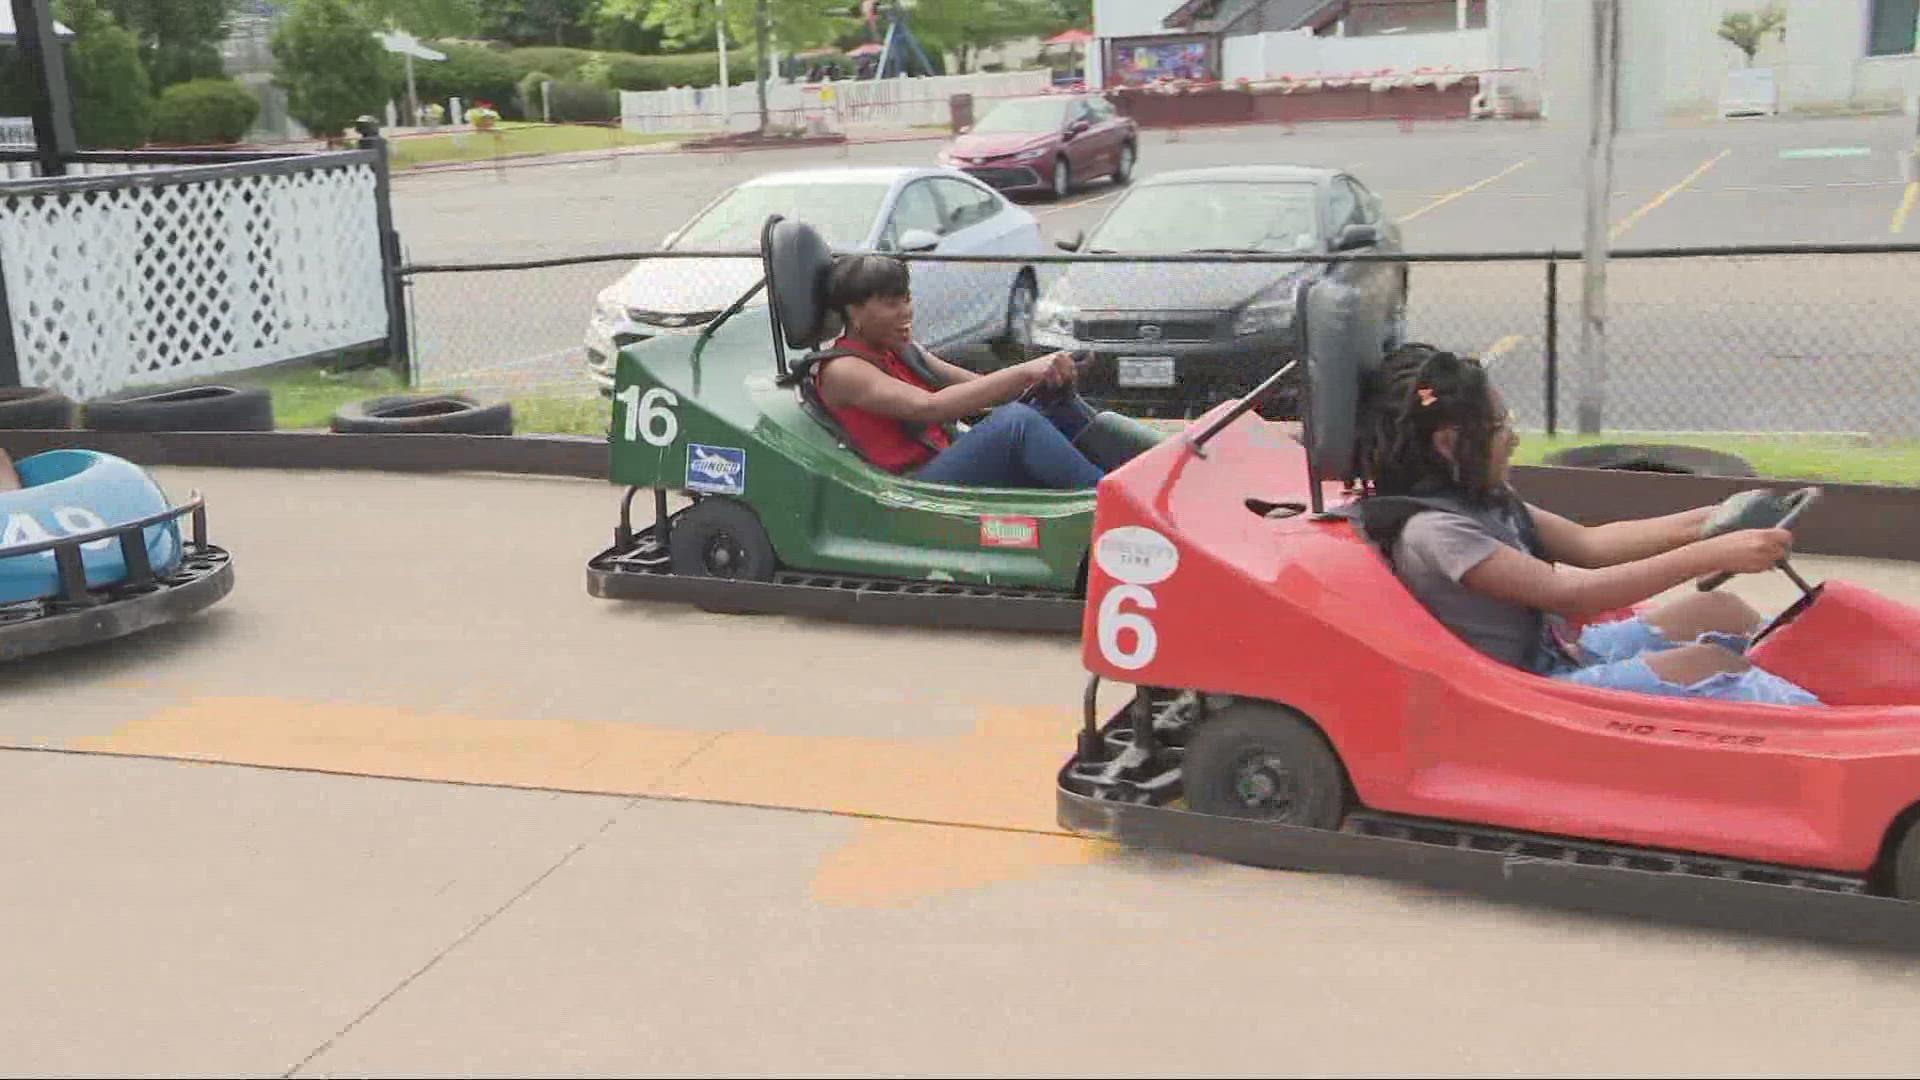 3News' Danielle Wiggins takes us to Fun 'n' Stuff in Macedonia for some fun go-kart racing with her family.